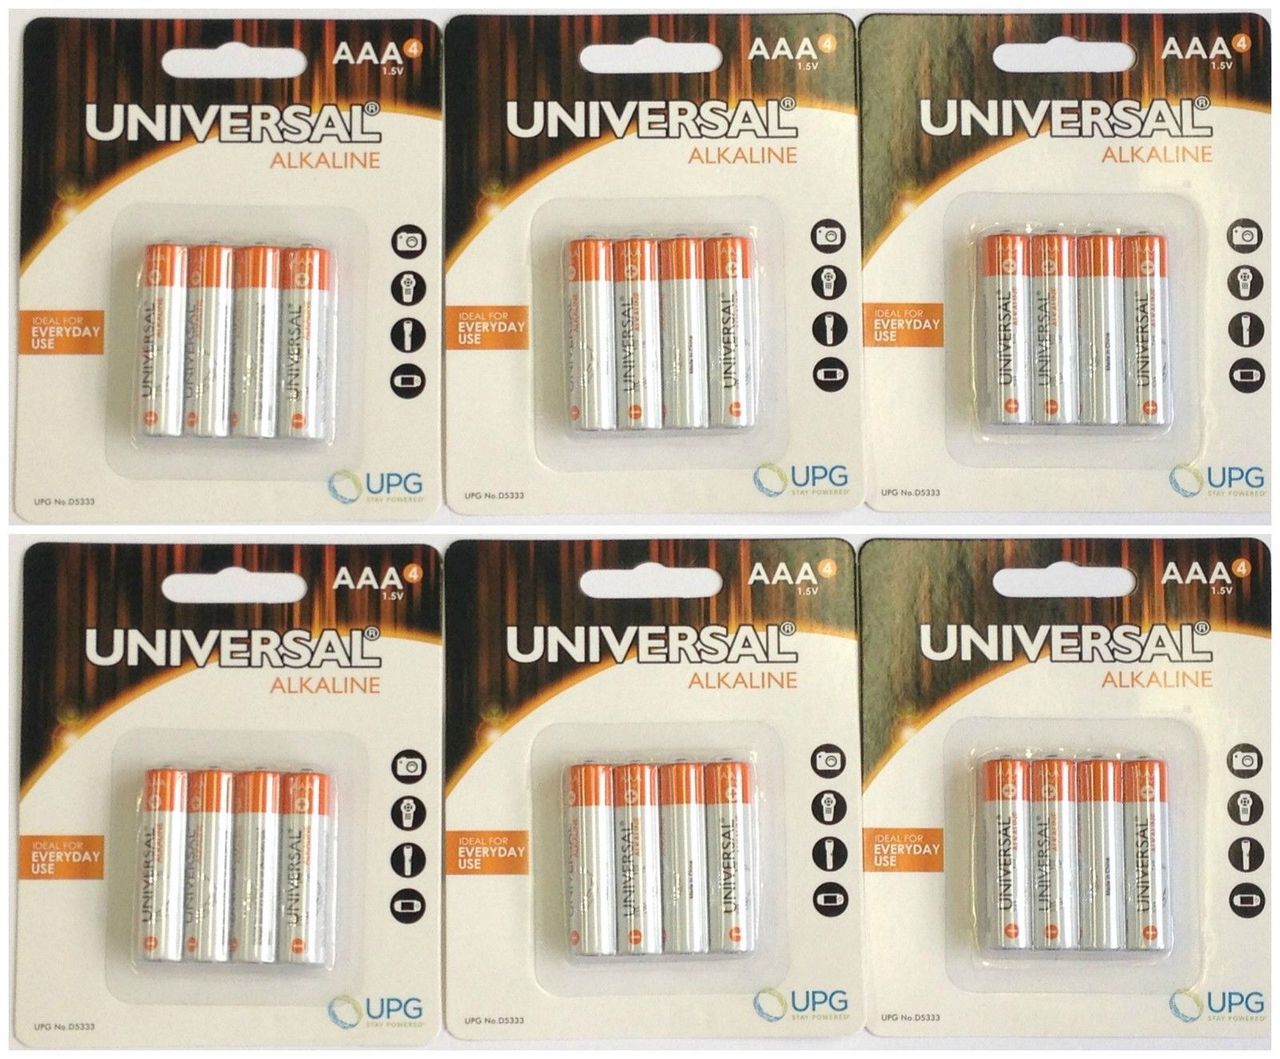 PACK OF 100 UNIVERSAL AAA - ALKALINE BATTERIES IN RETAIL PACKAGING + FREE SHIPPING